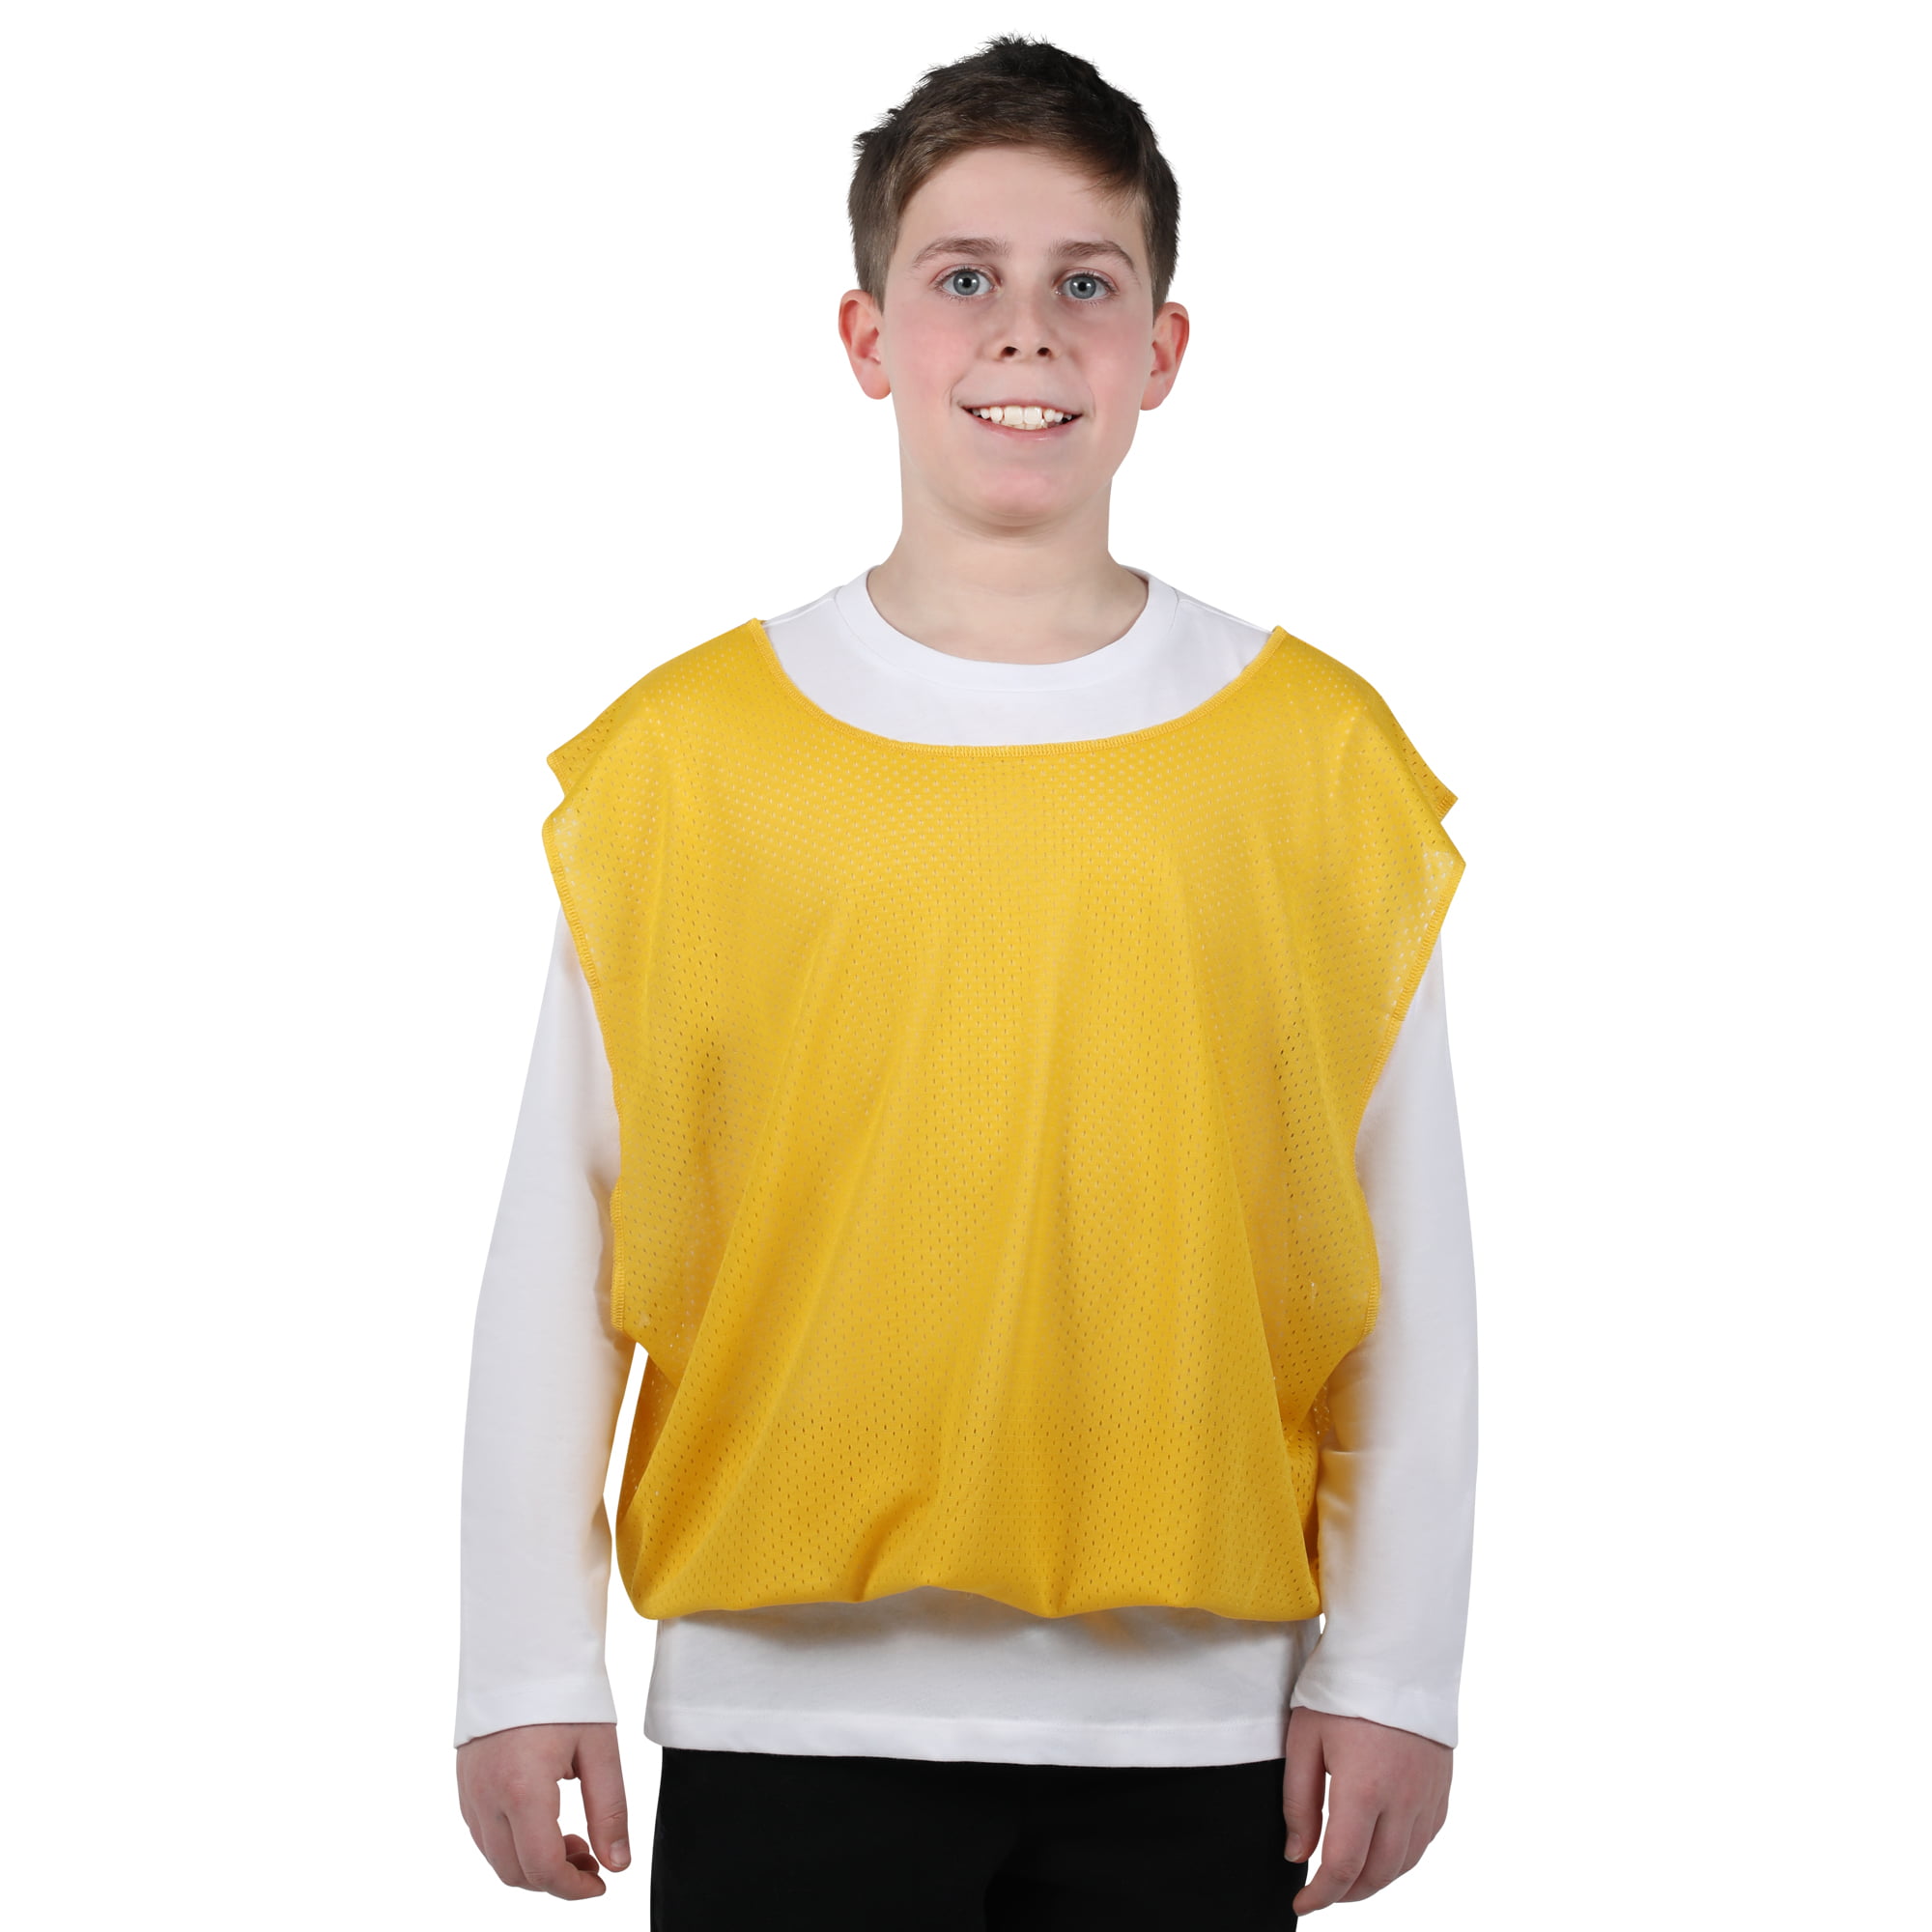 Pack of 12 Details about   *NEW Champion Sports Youth Pinnie Practice Scrimmage Vest Yellow